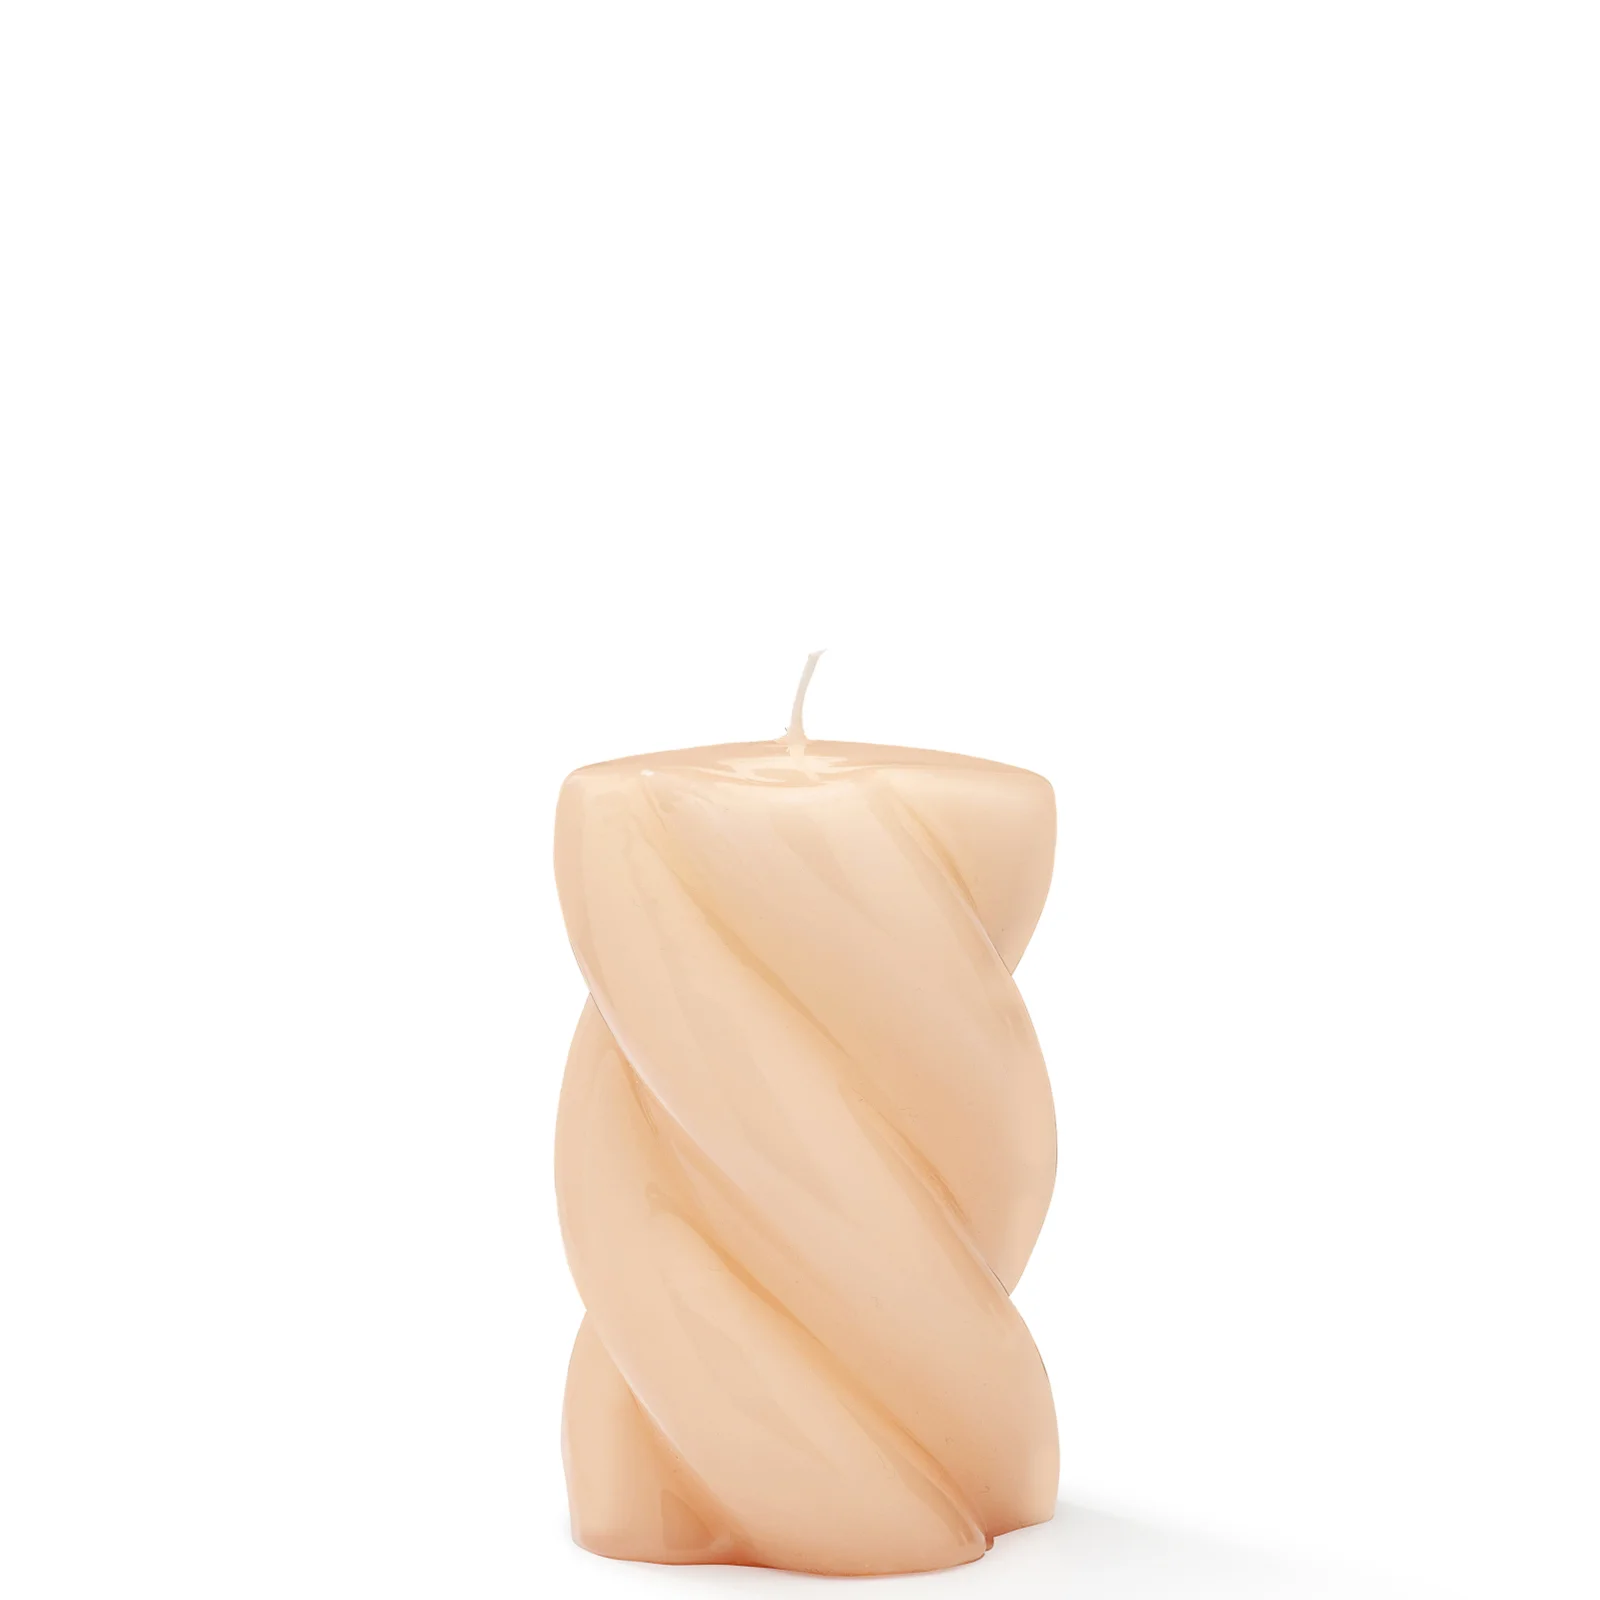 anna + nina Blunt Twisted Candle Short Nude Image 1